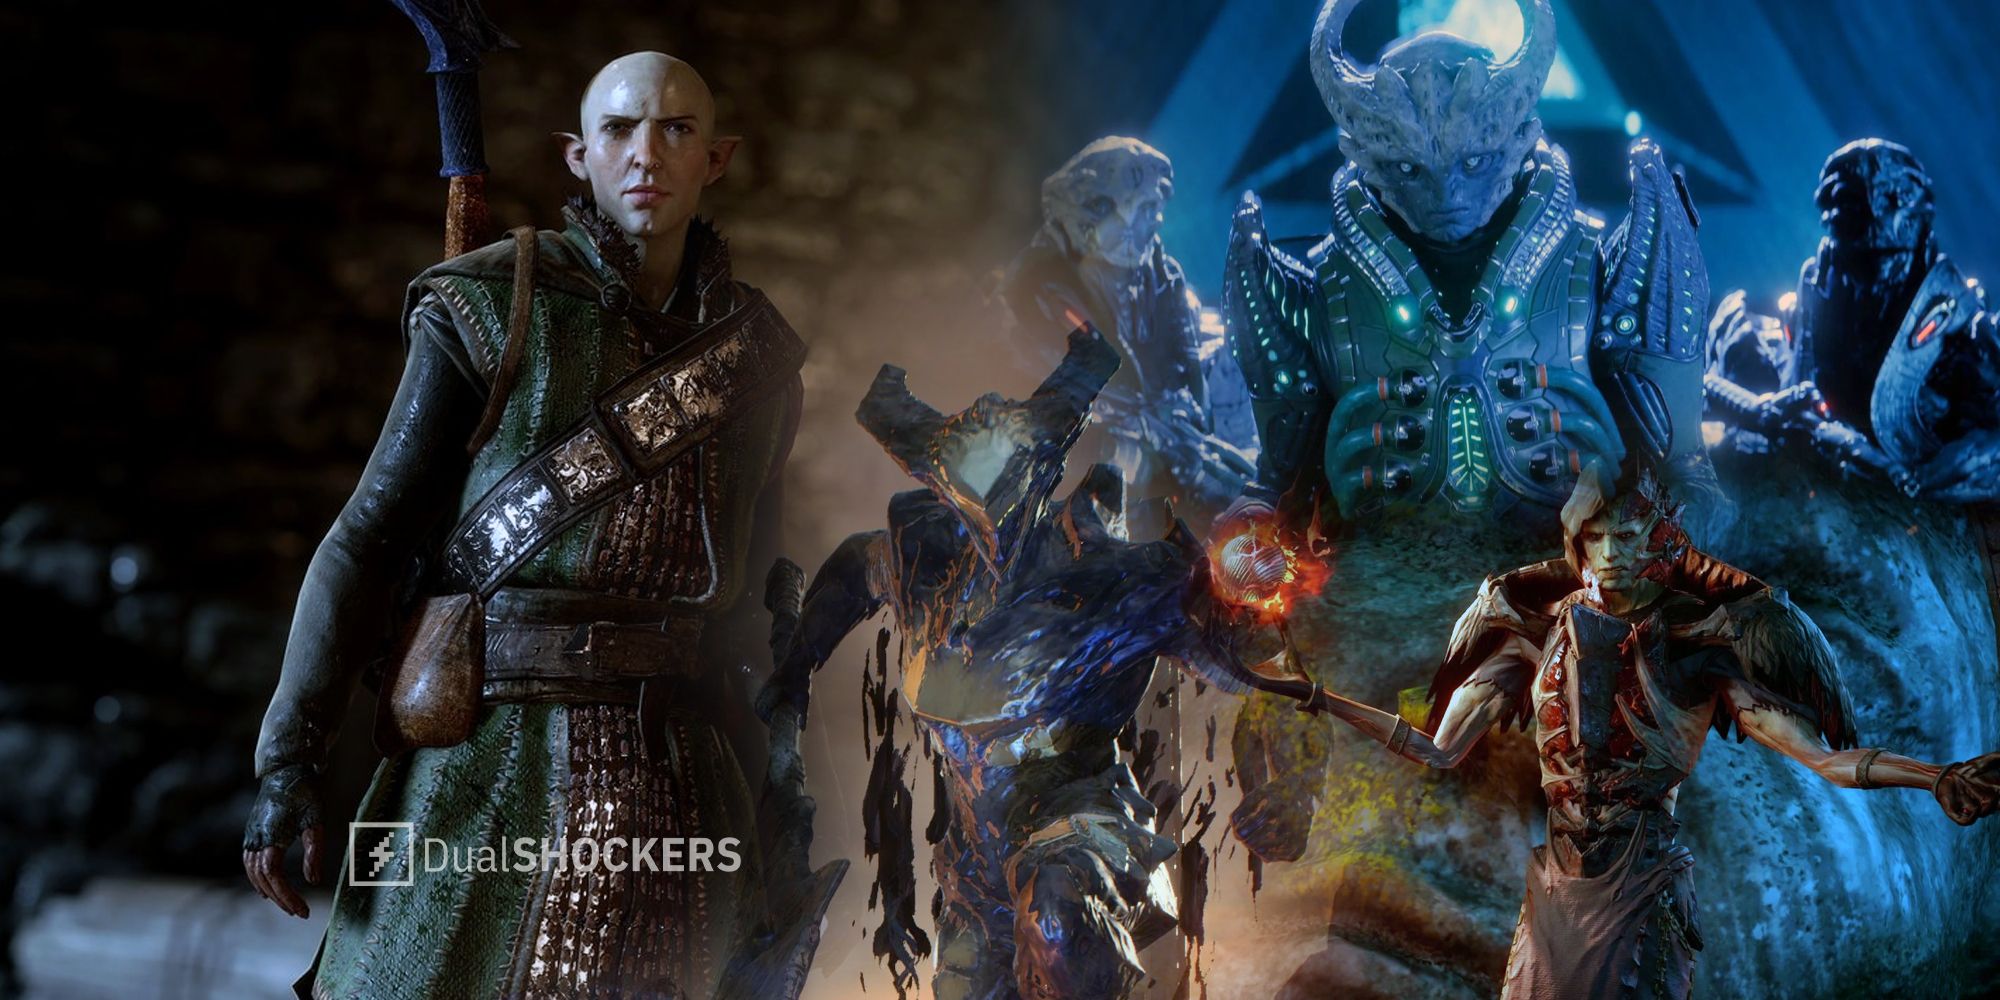 Dragon Age: Dreadwolf Solas, Corypheus from Dragon Age Inquisition, Archon of the Kett from Mass Effect: Andromeda, and The Monitor from Anthem villians gameplay